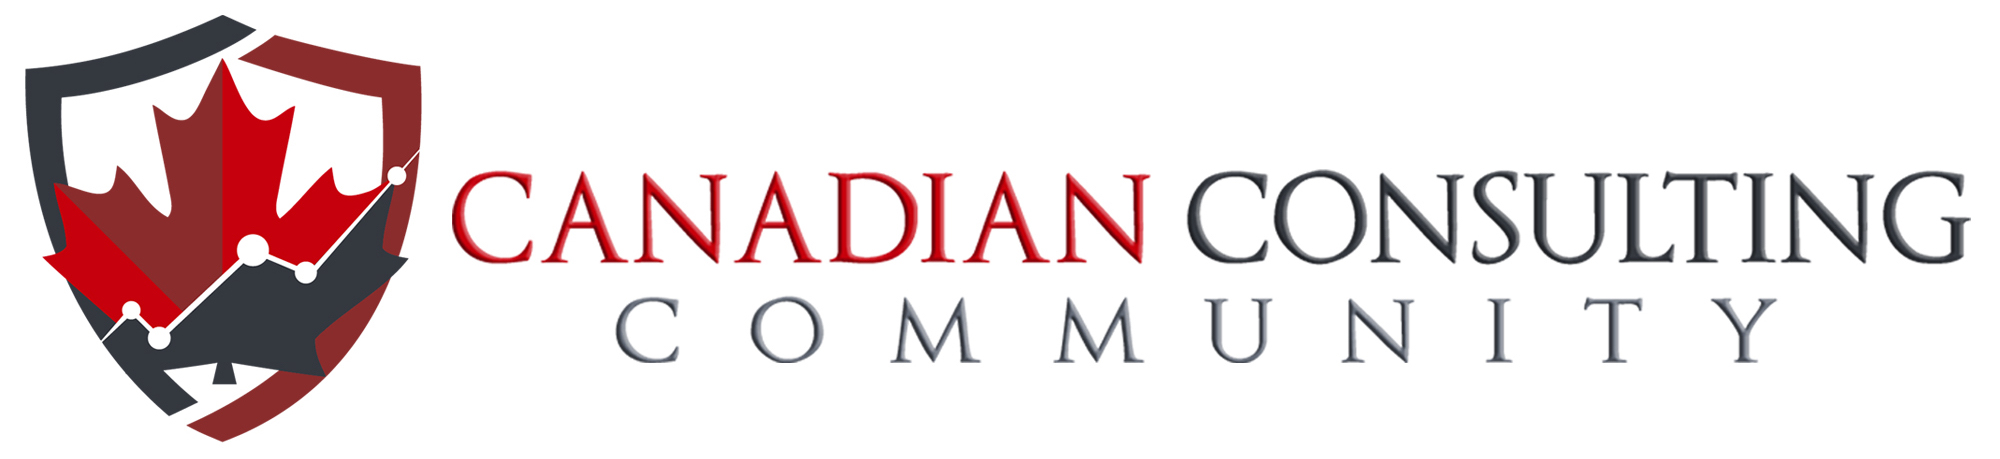 Canadian Consulting Community Logo